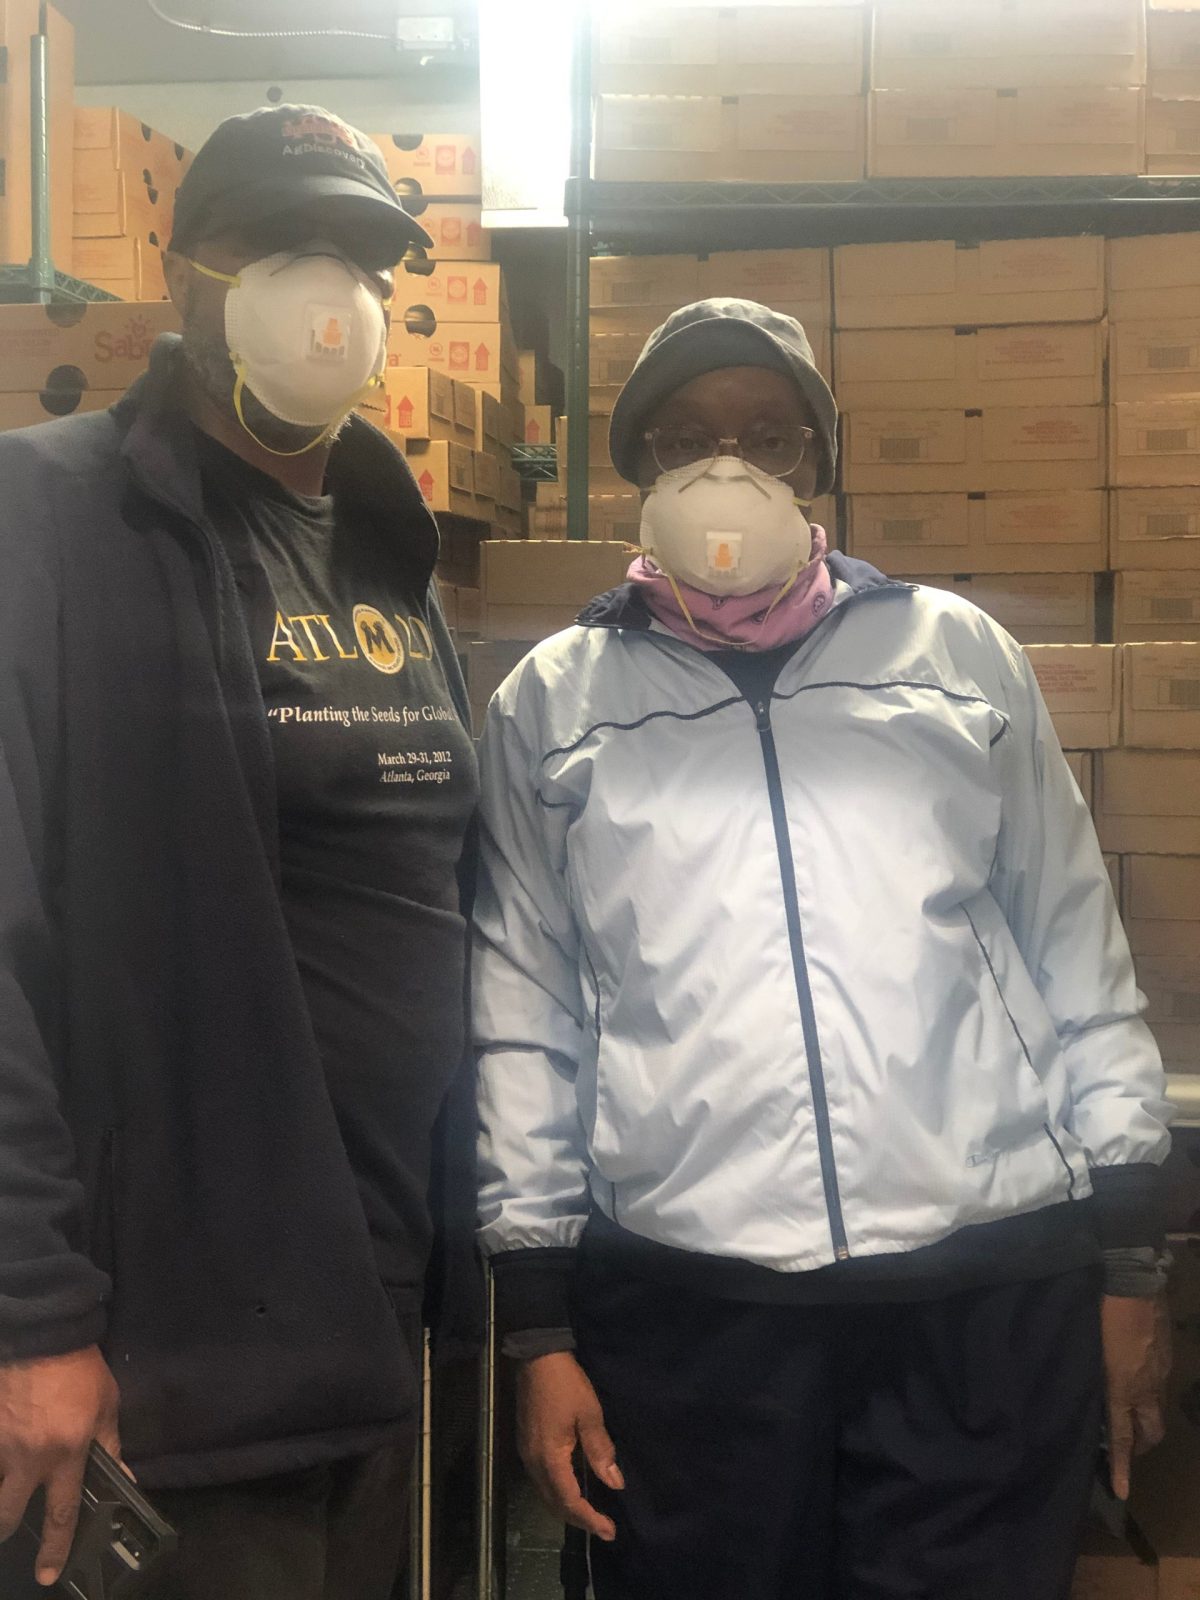 Two volunteers pose in face masks for safety